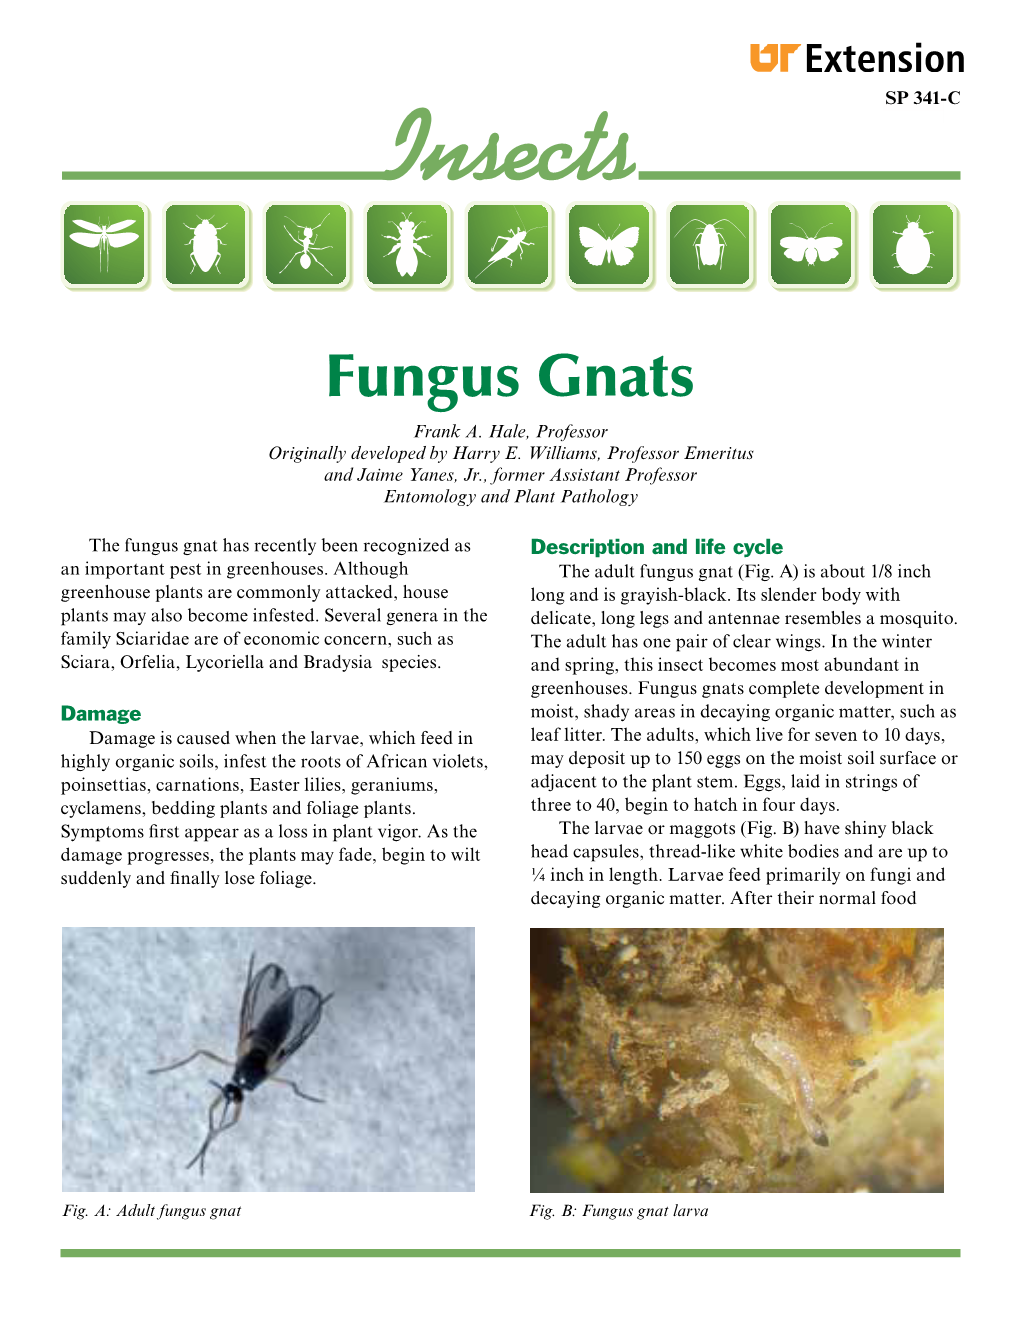 Insect Fungus Gnats